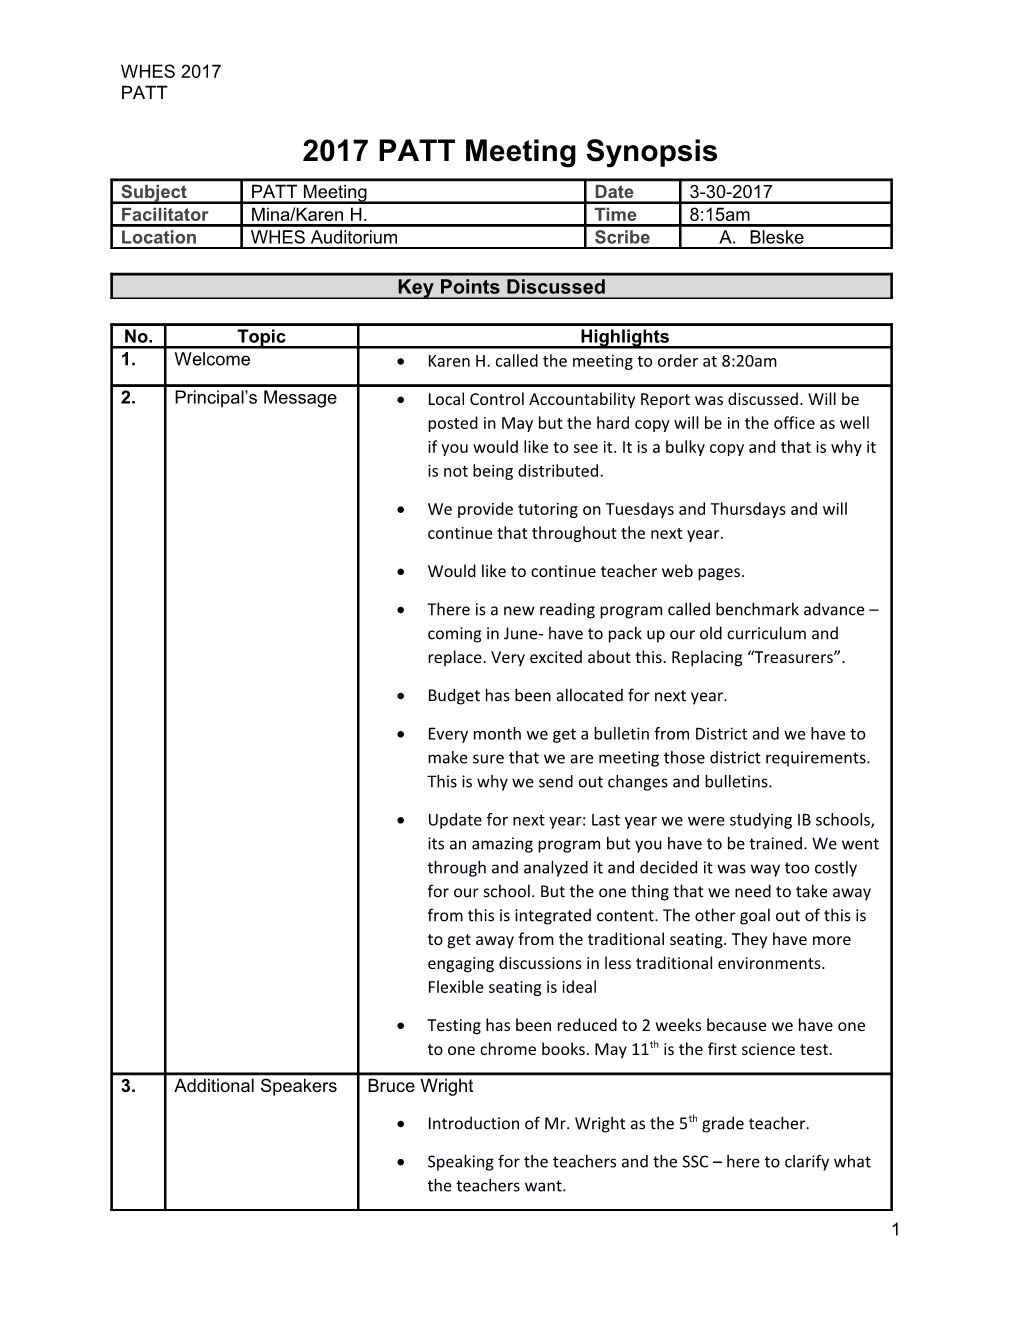 Copy of Meeting Minutes